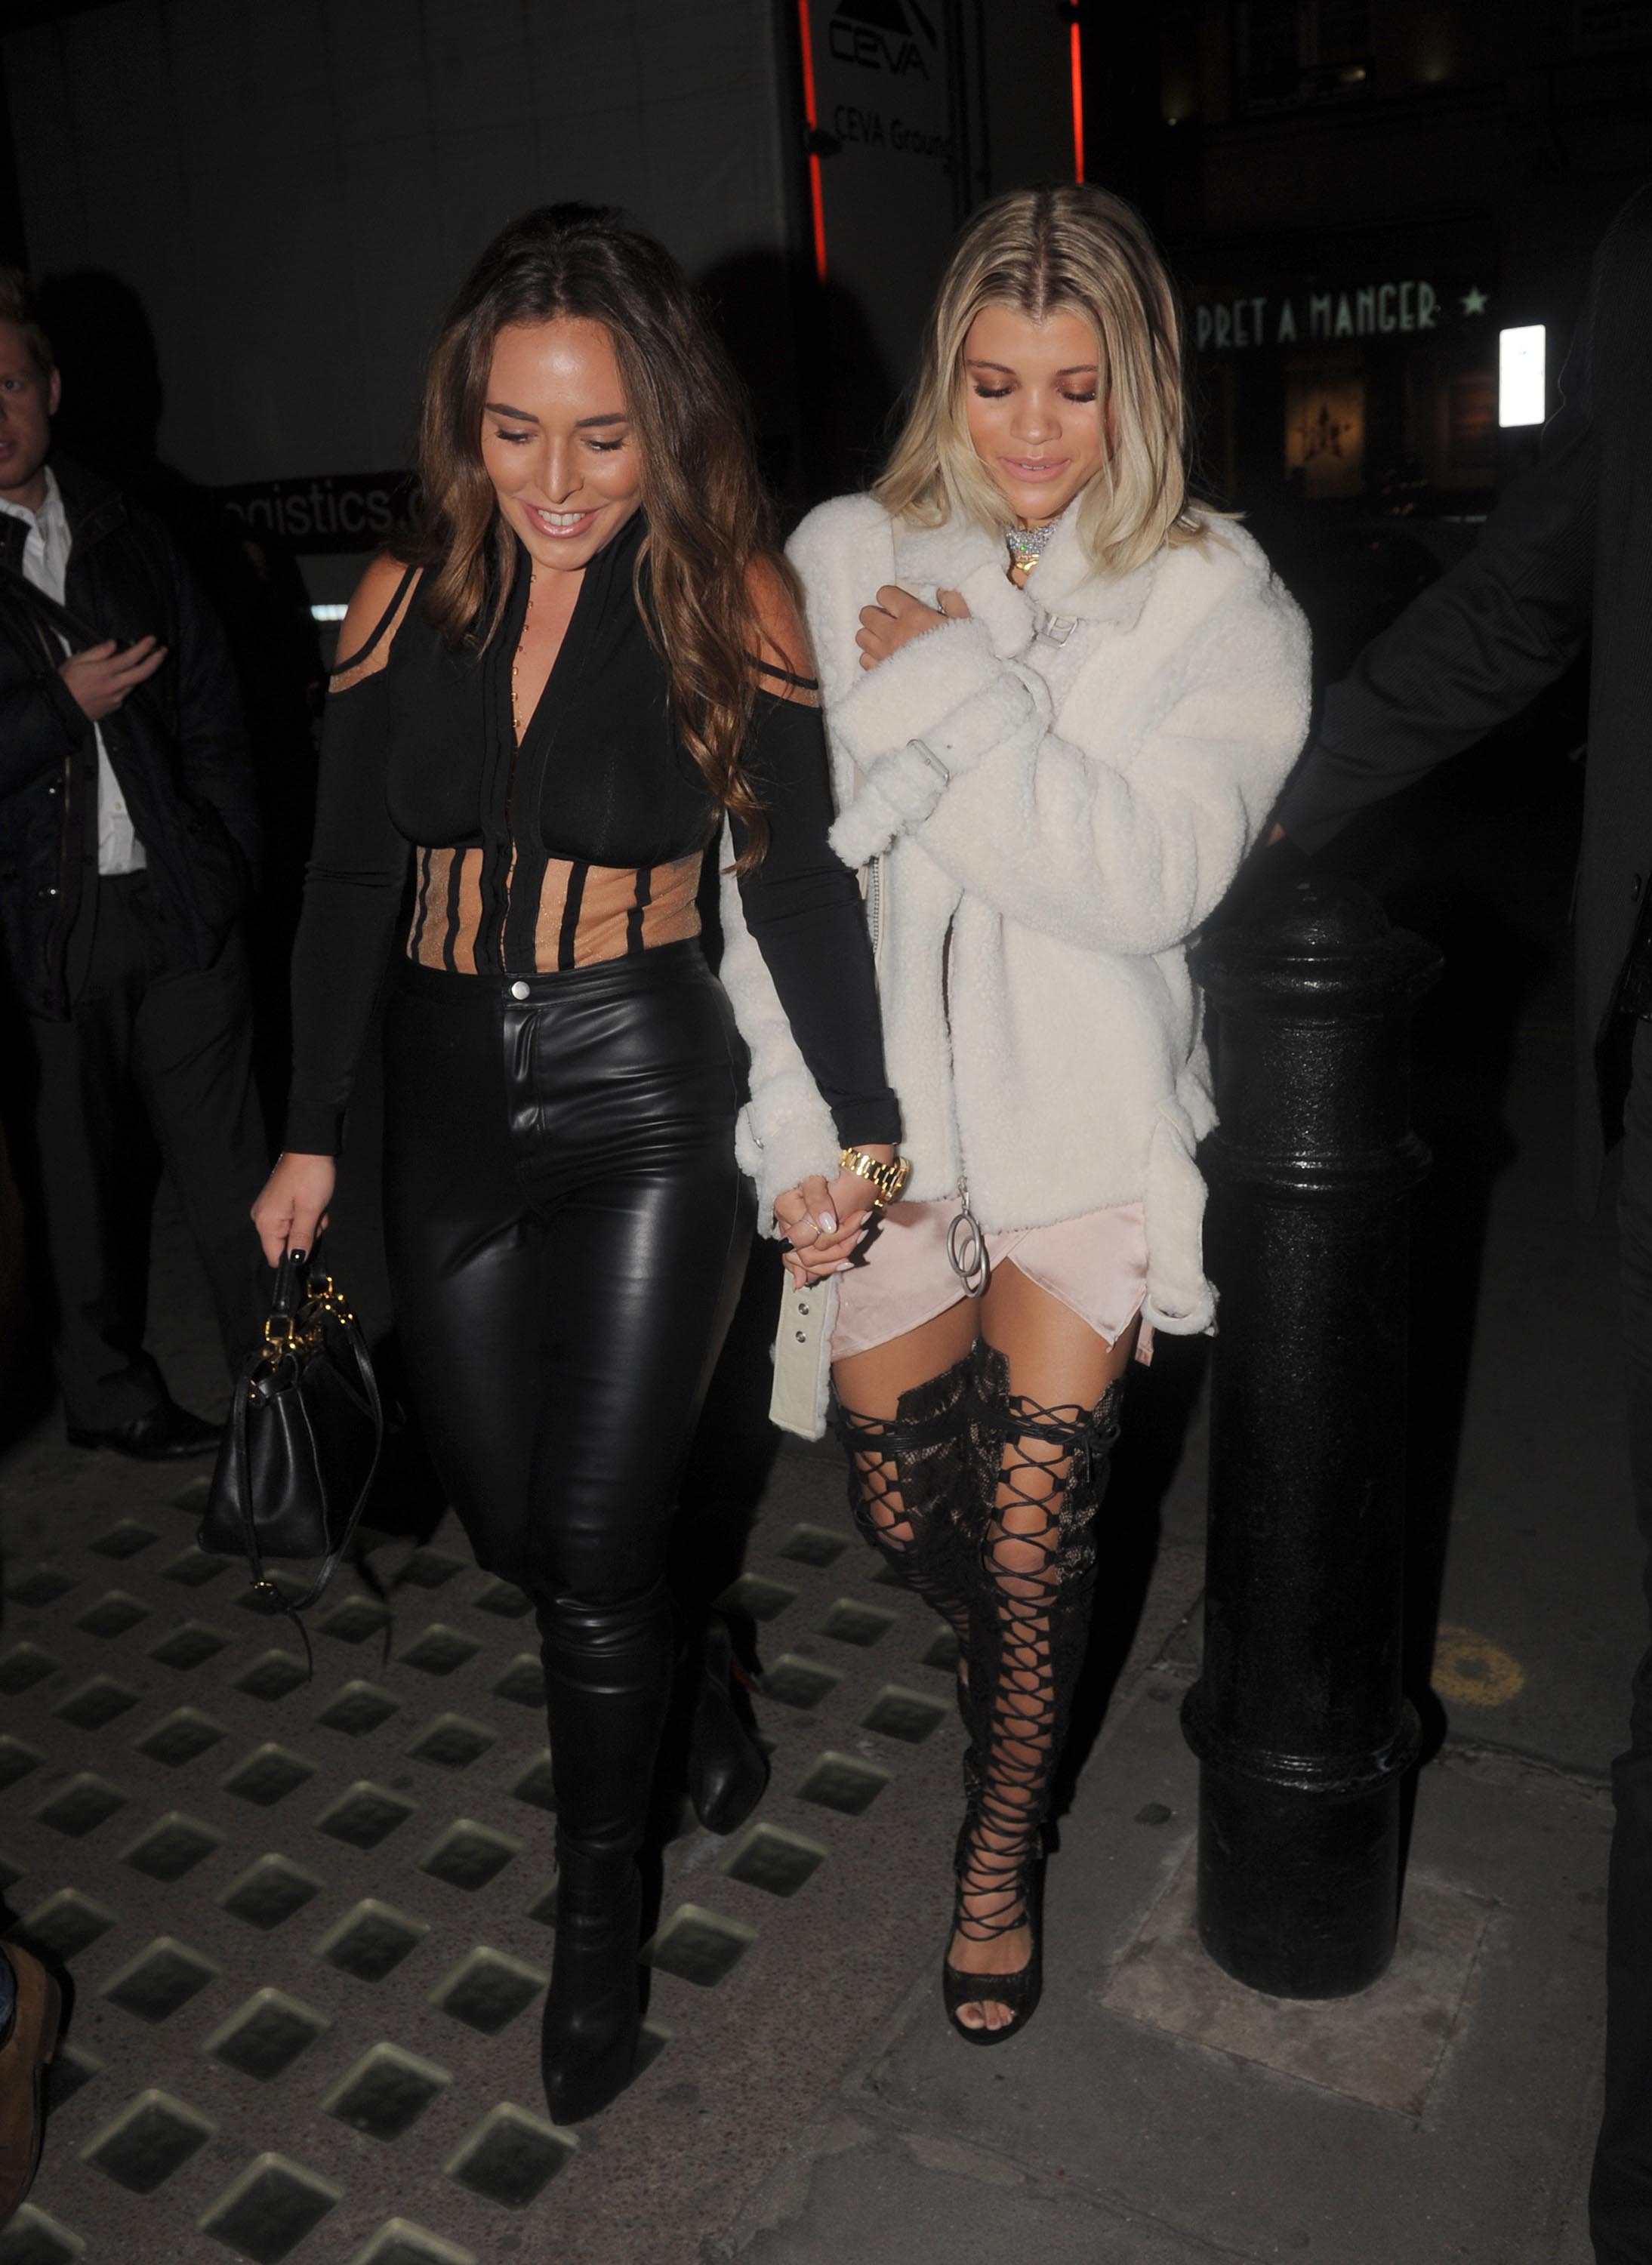 Chloe Green attends the Prettylittlething starring Sofia Richie launch party